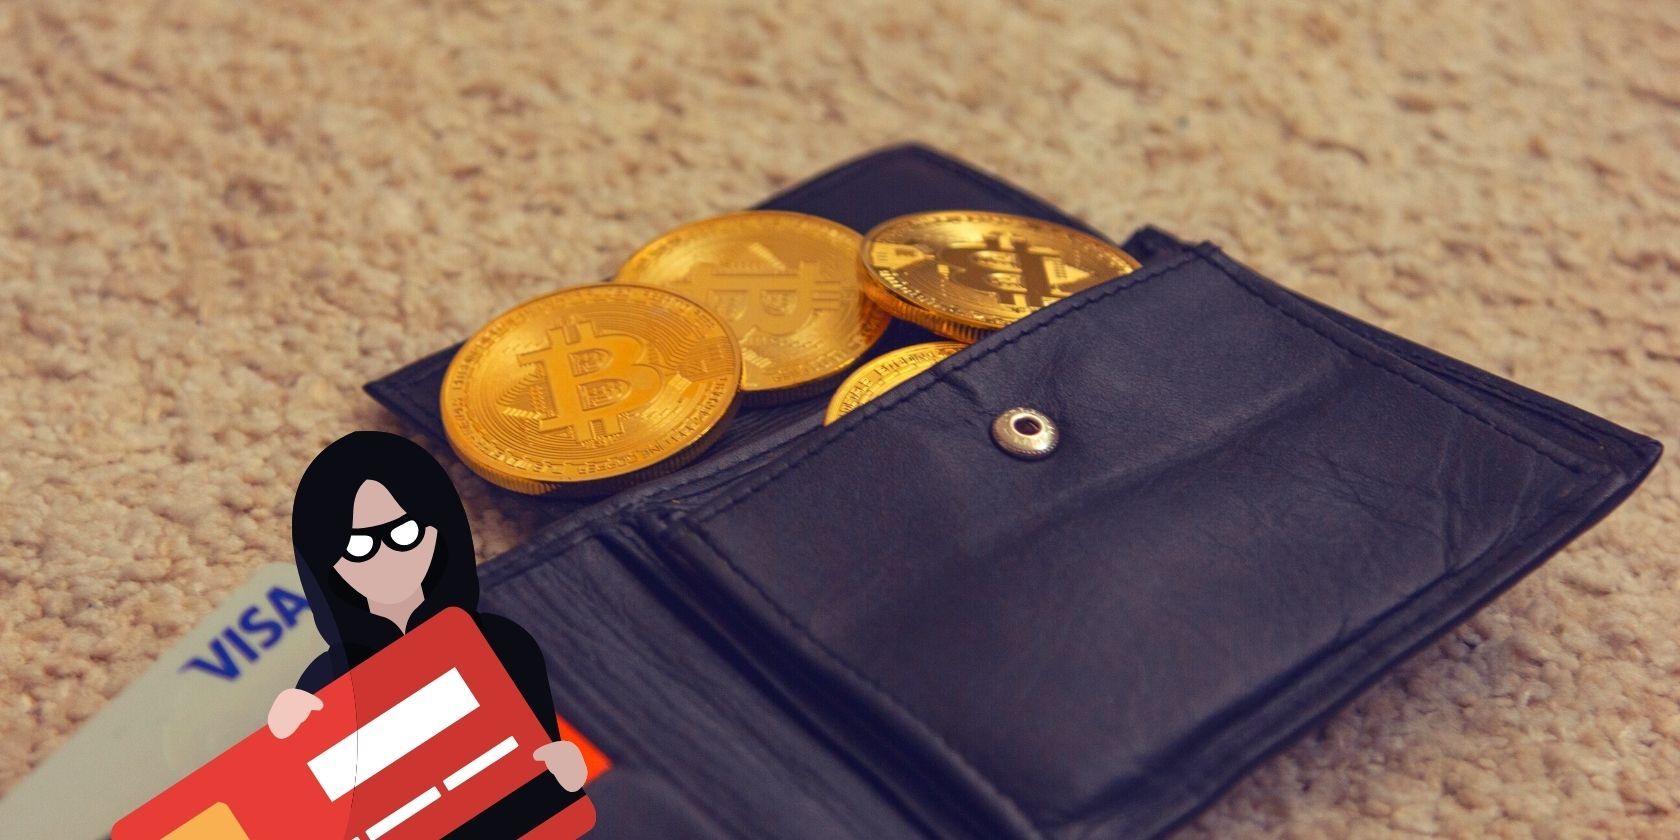 Hacker credit card graph juxtaposed against a wallet with bitcoins